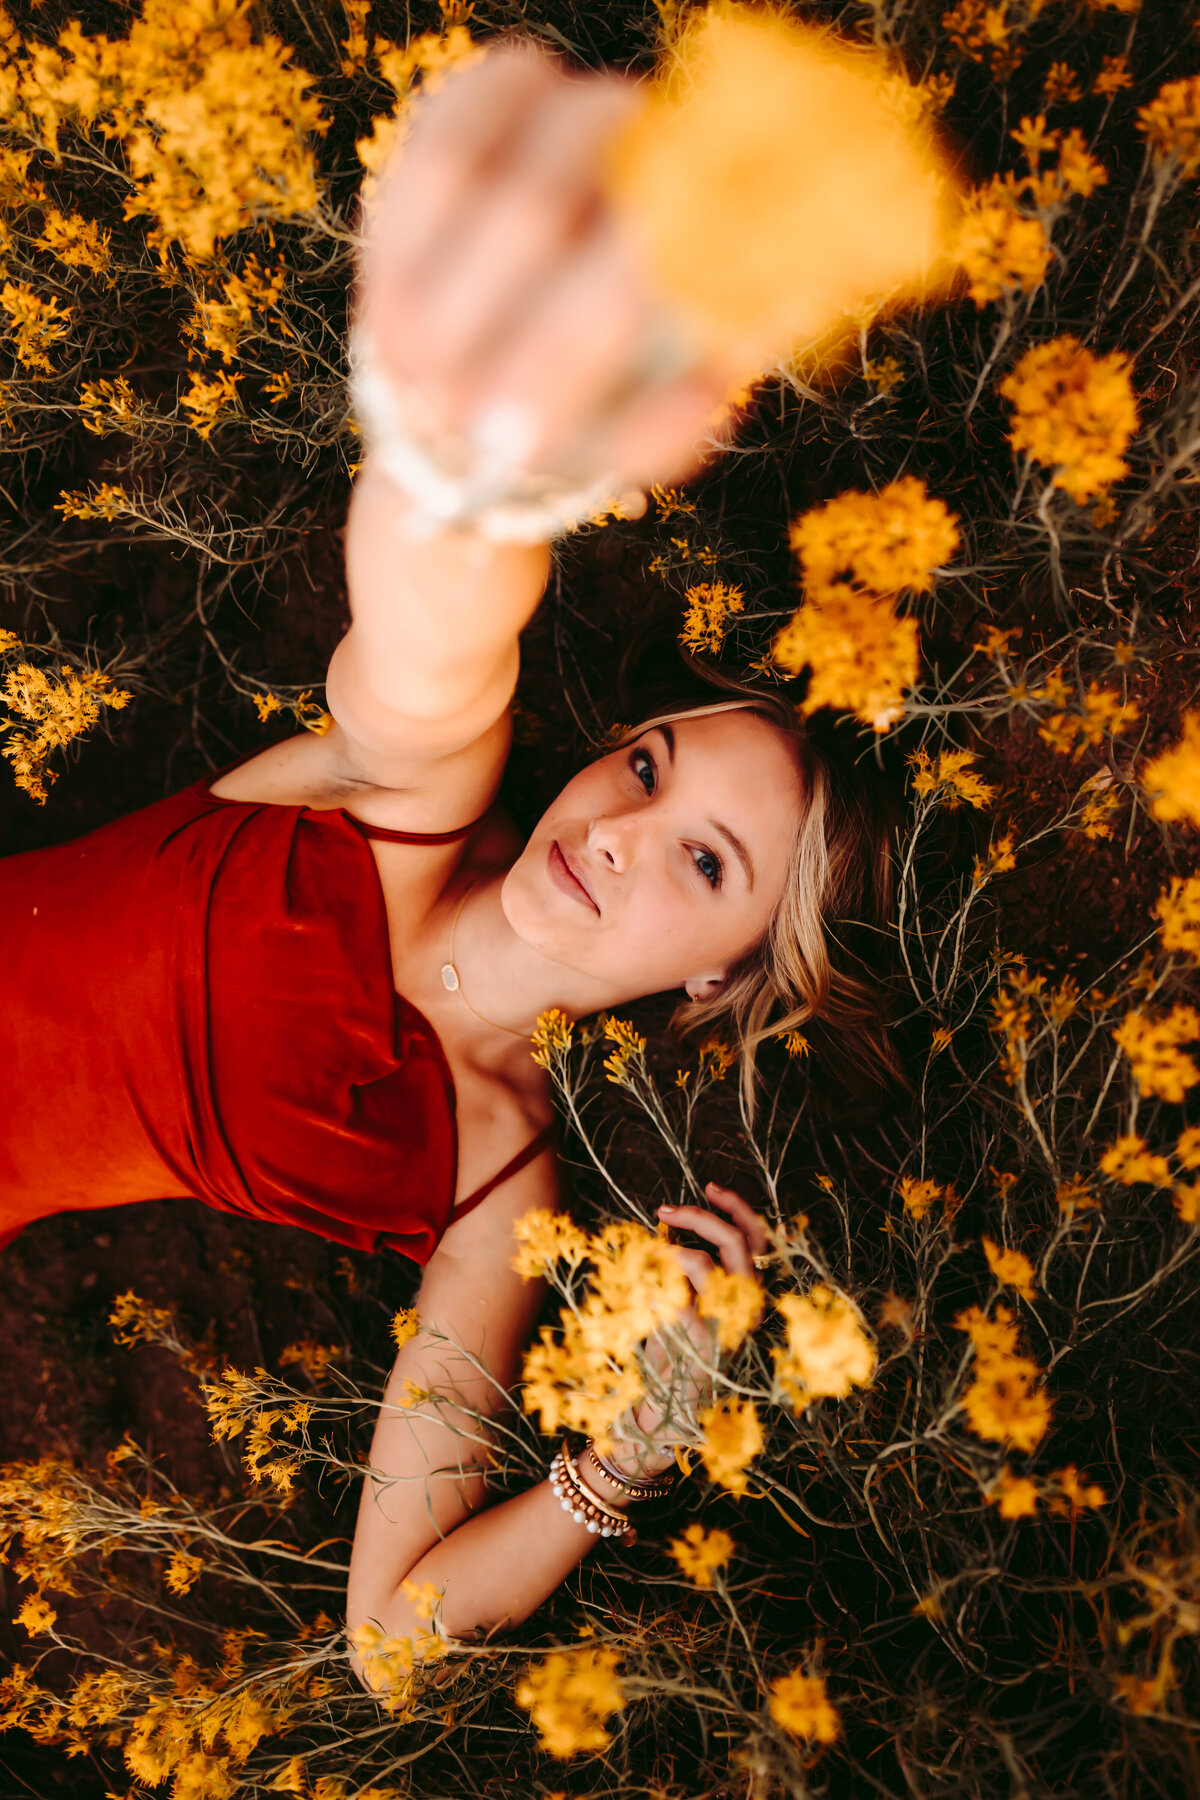 Jordan lays in a field of flowers for her Telluride senior pictures.